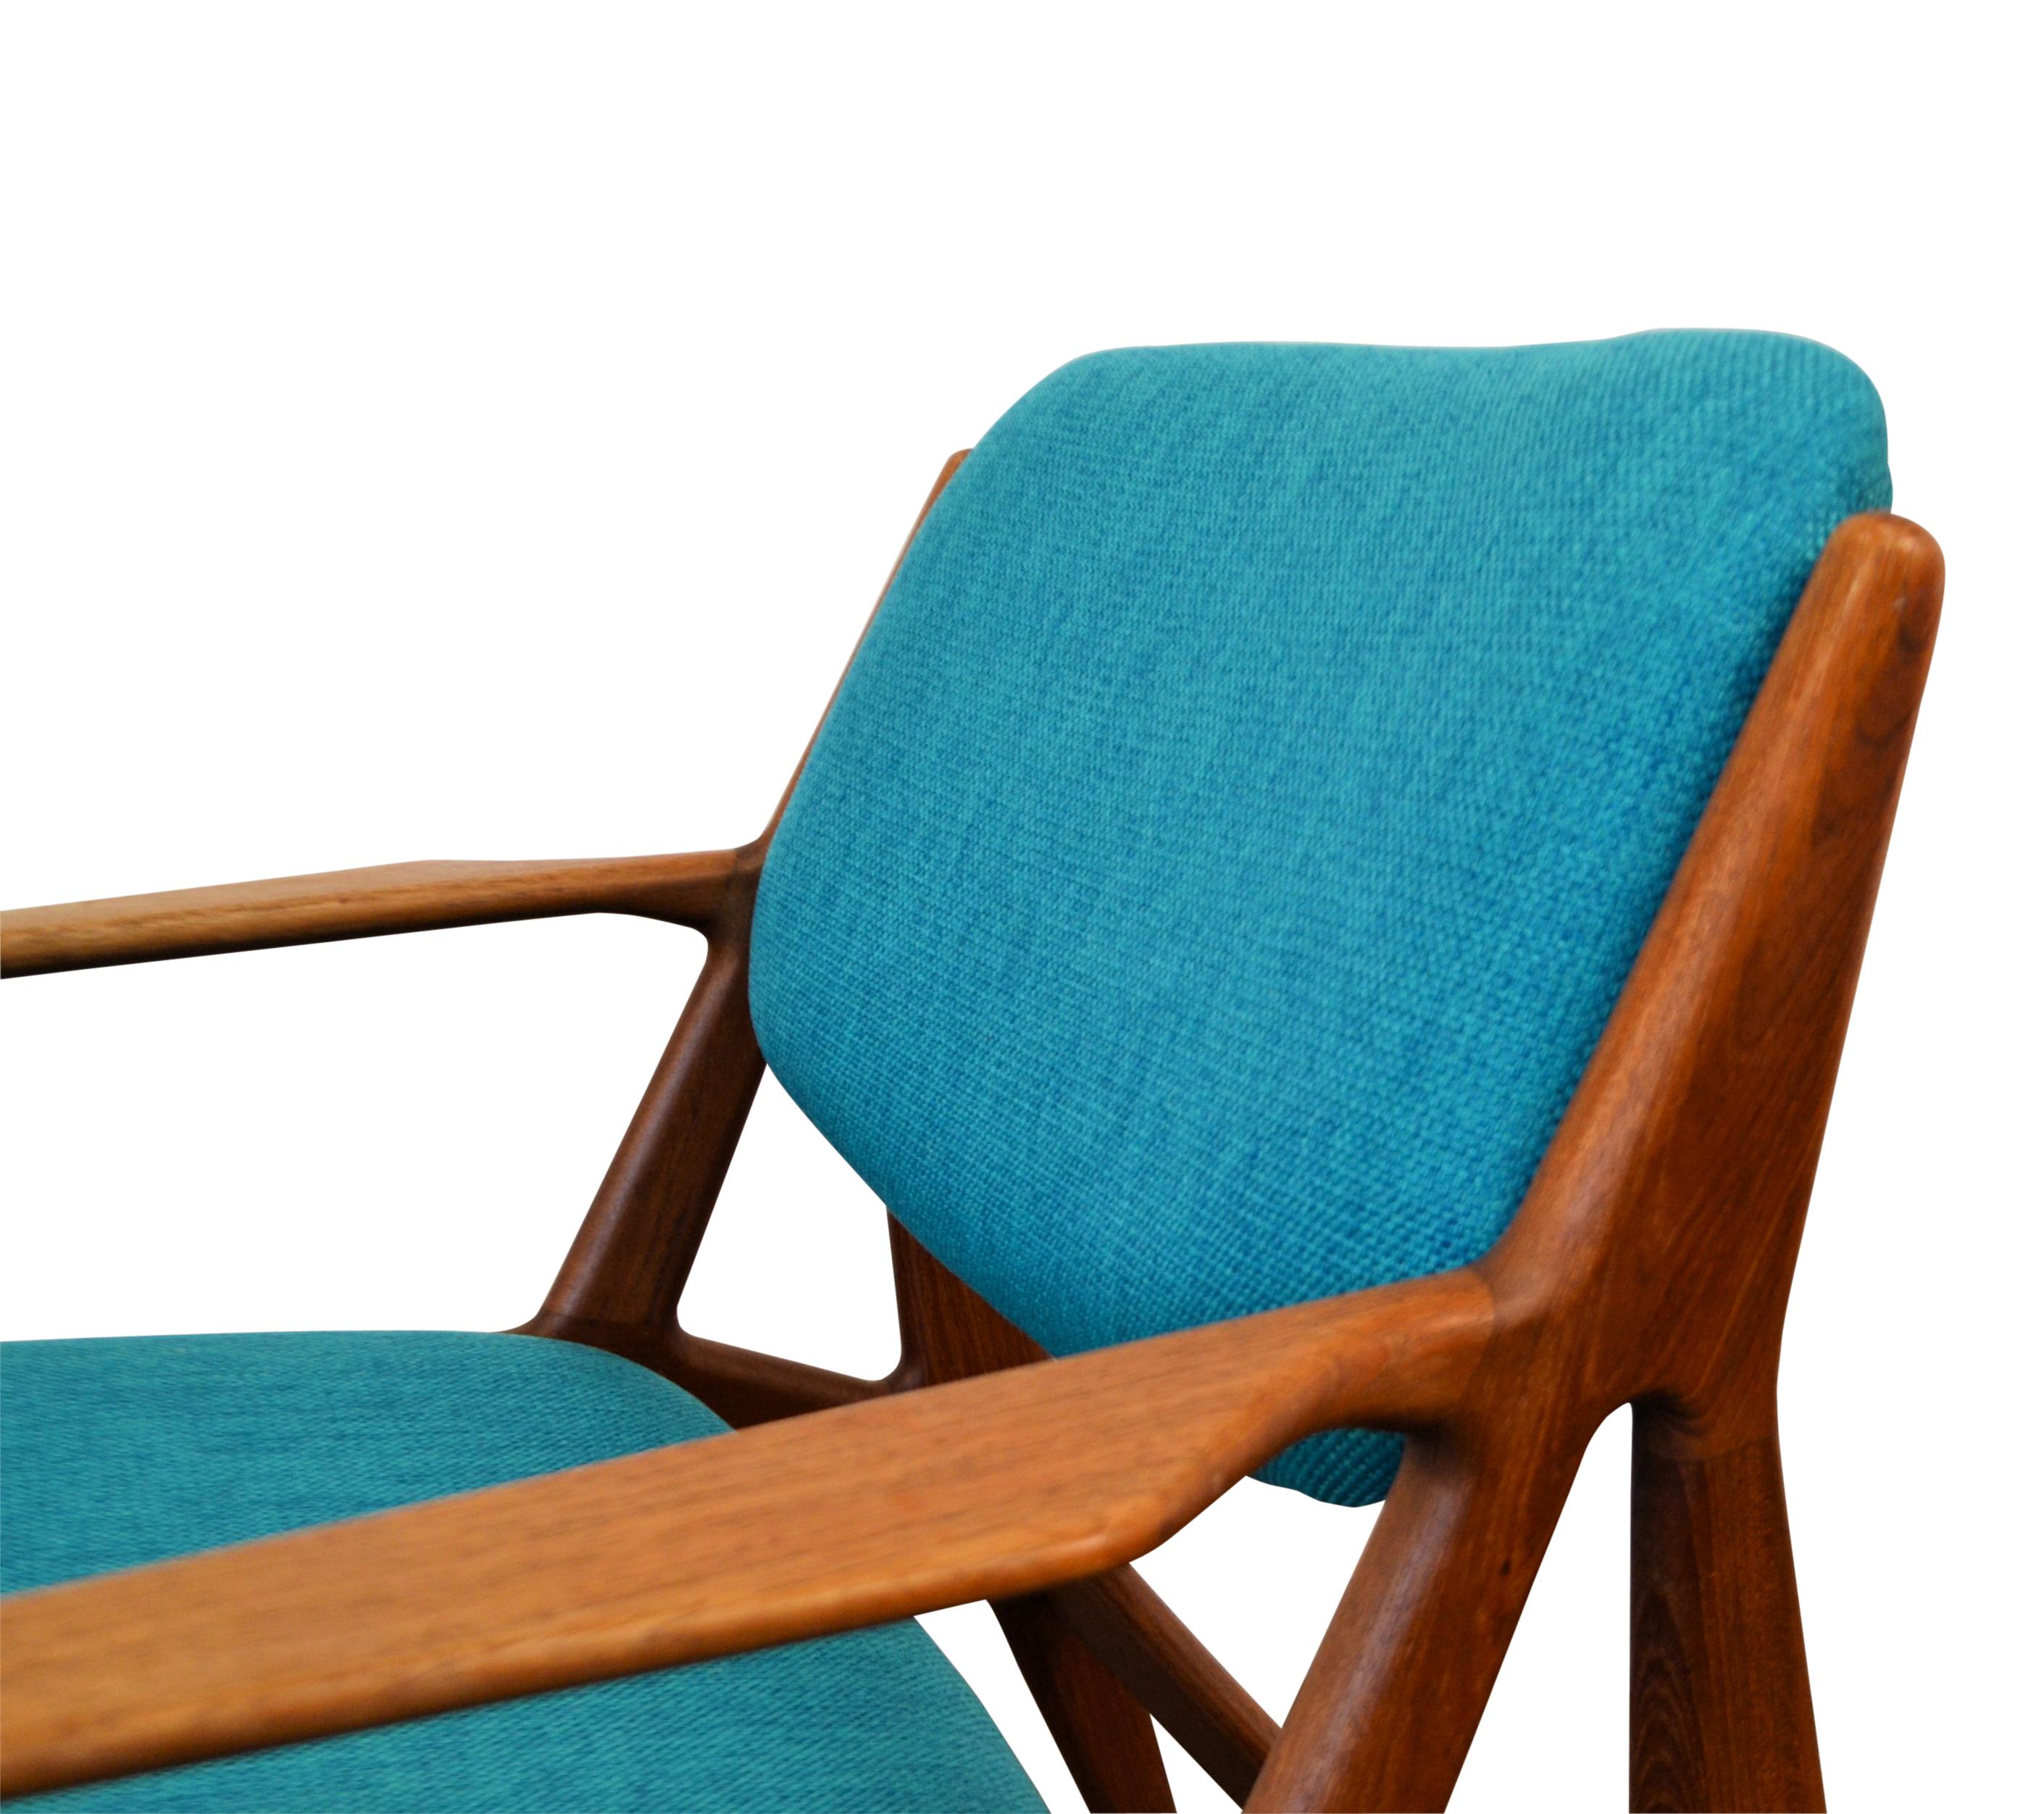 Stylish vintage Danish design easy chair designed by Arne Vodder for Danish manufacturer Vamo. This rare low version of the model “Ellen” slung chair offers excellent comfort, a solid teak frame and new foam and upholstery. Arne Vodder created only